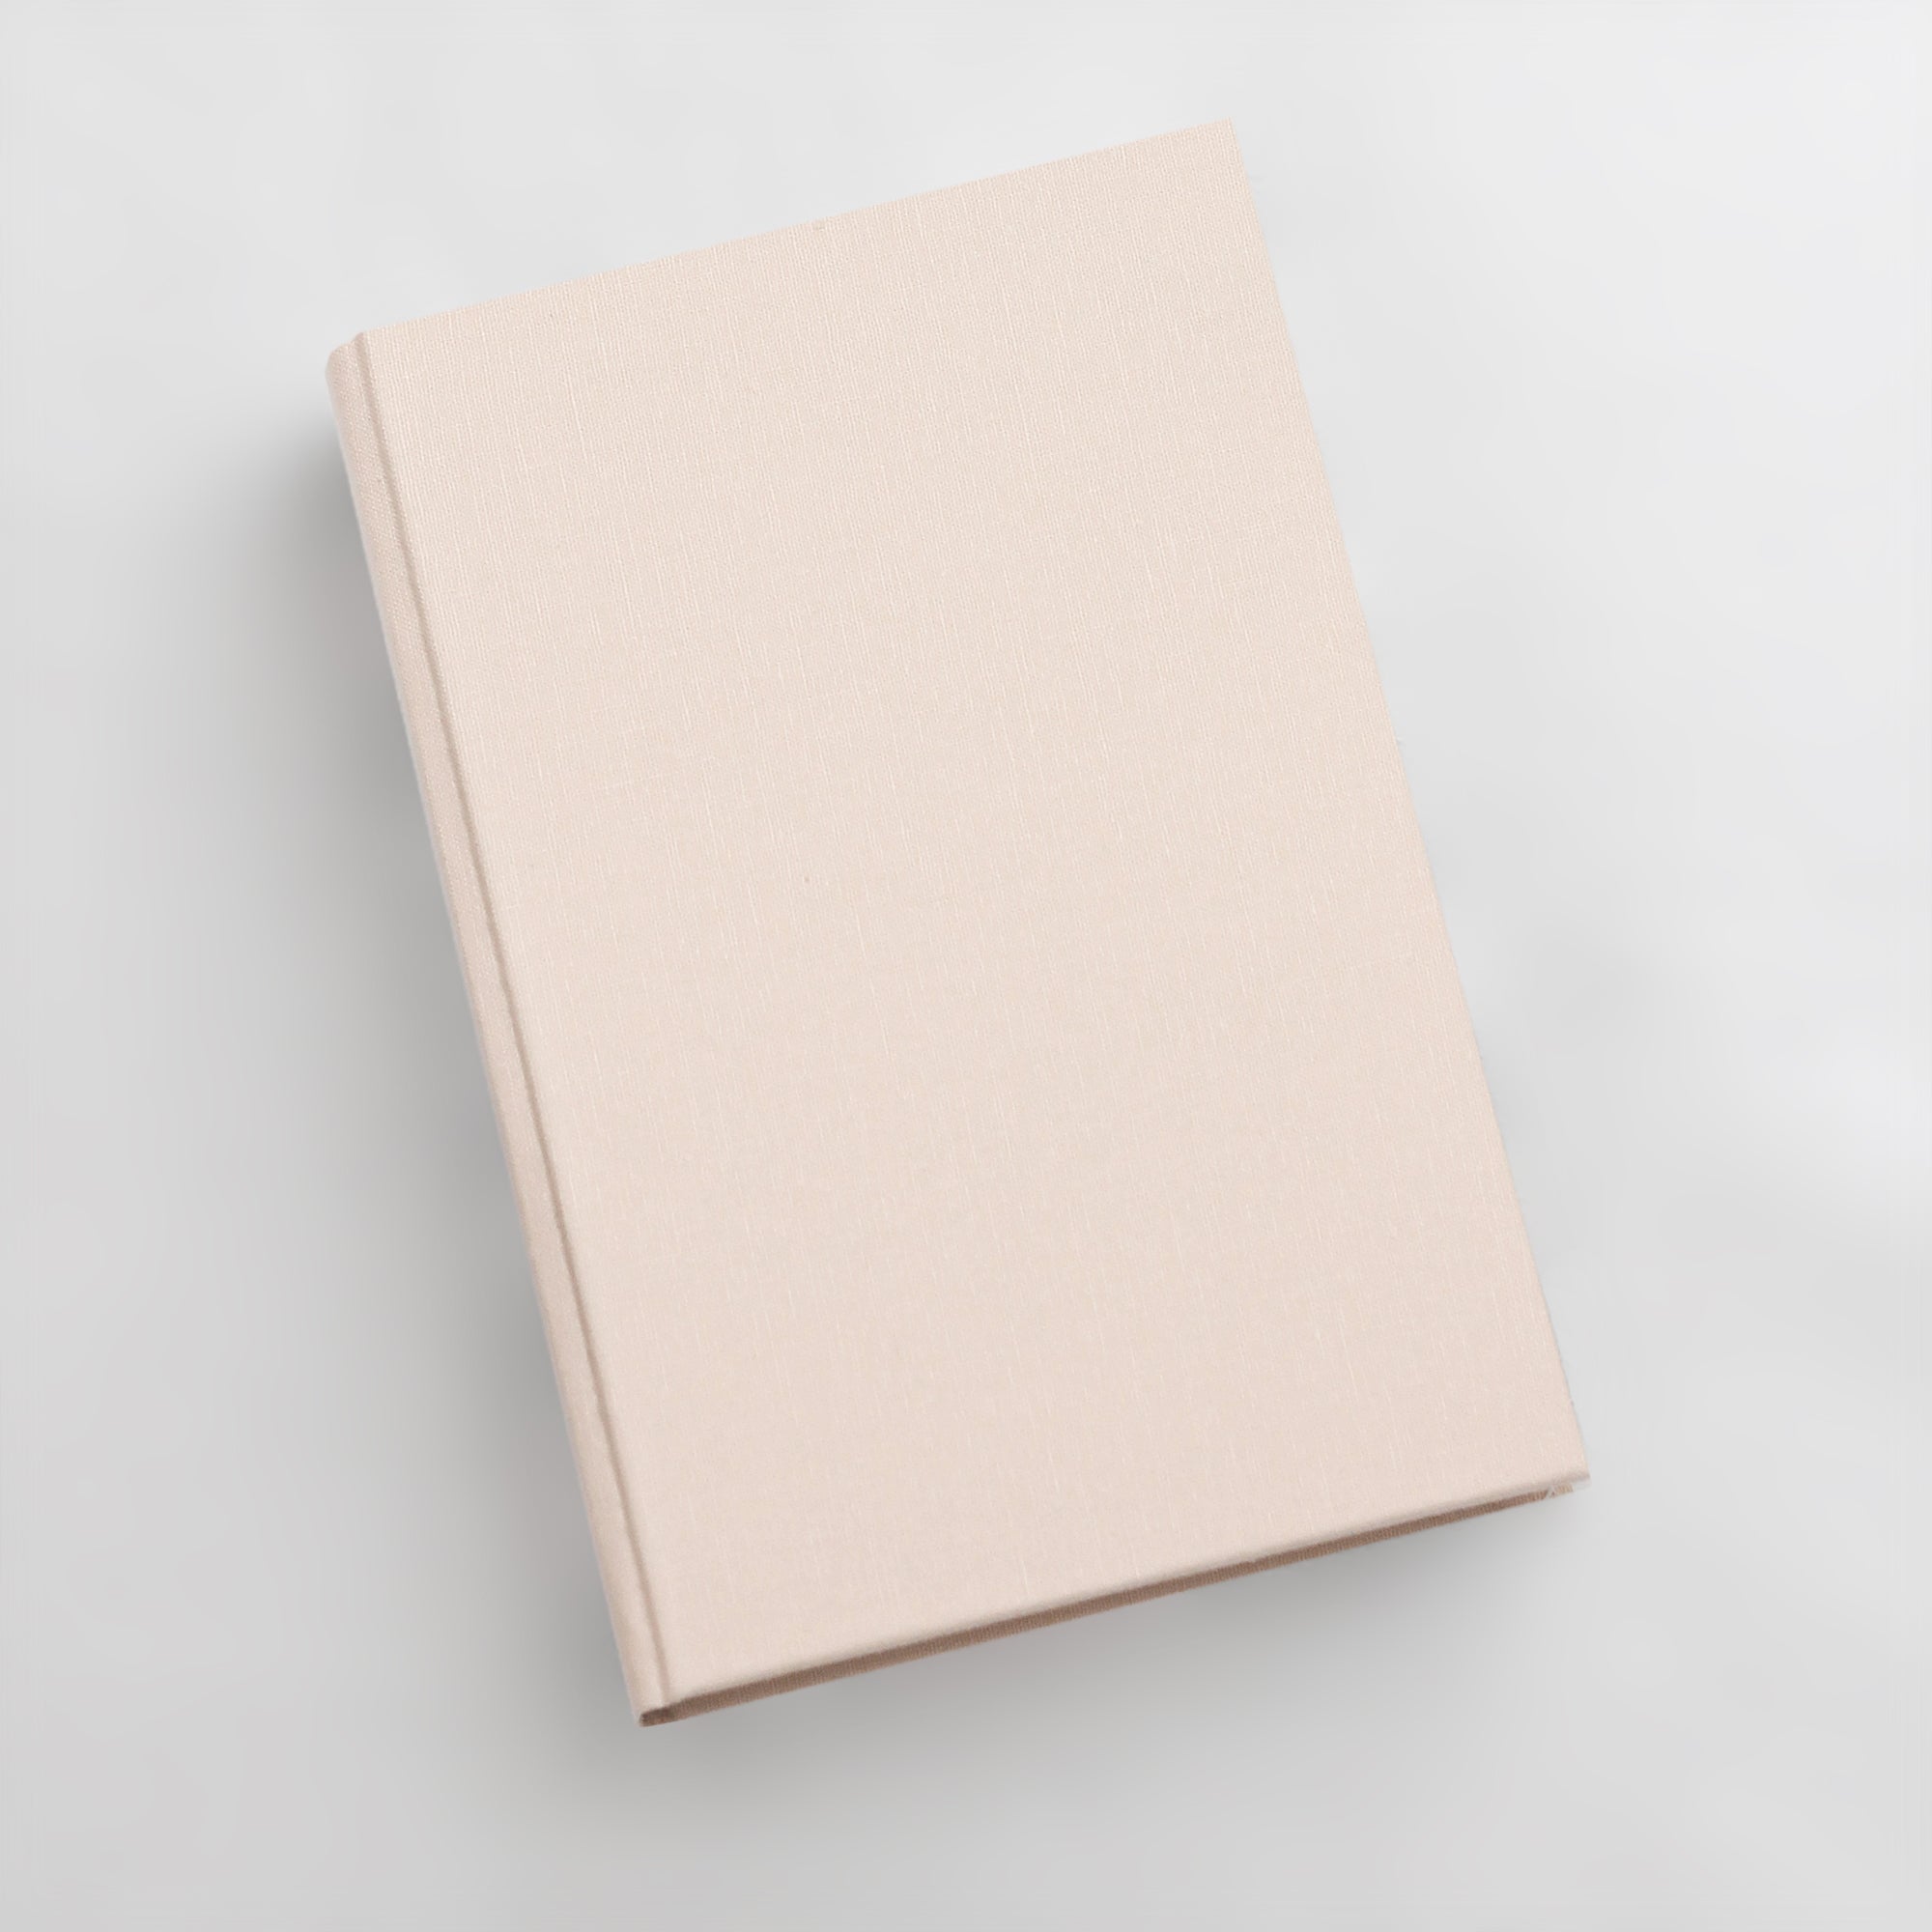 Kraft Journal: Blank Pages by Apuntes